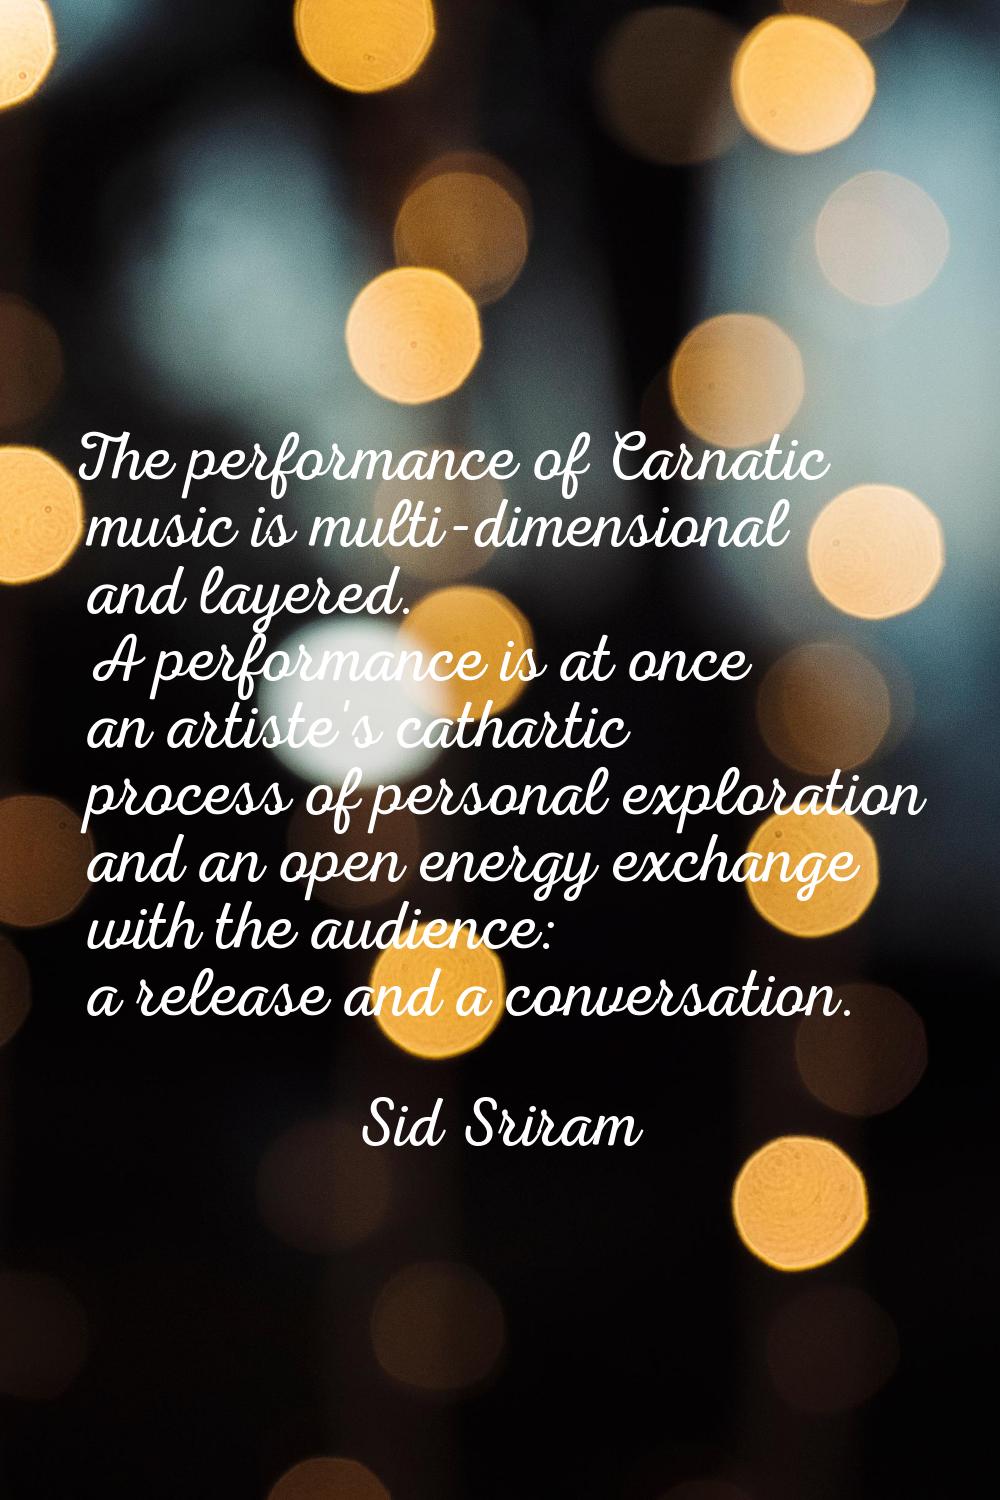 The performance of Carnatic music is multi-dimensional and layered. A performance is at once an art